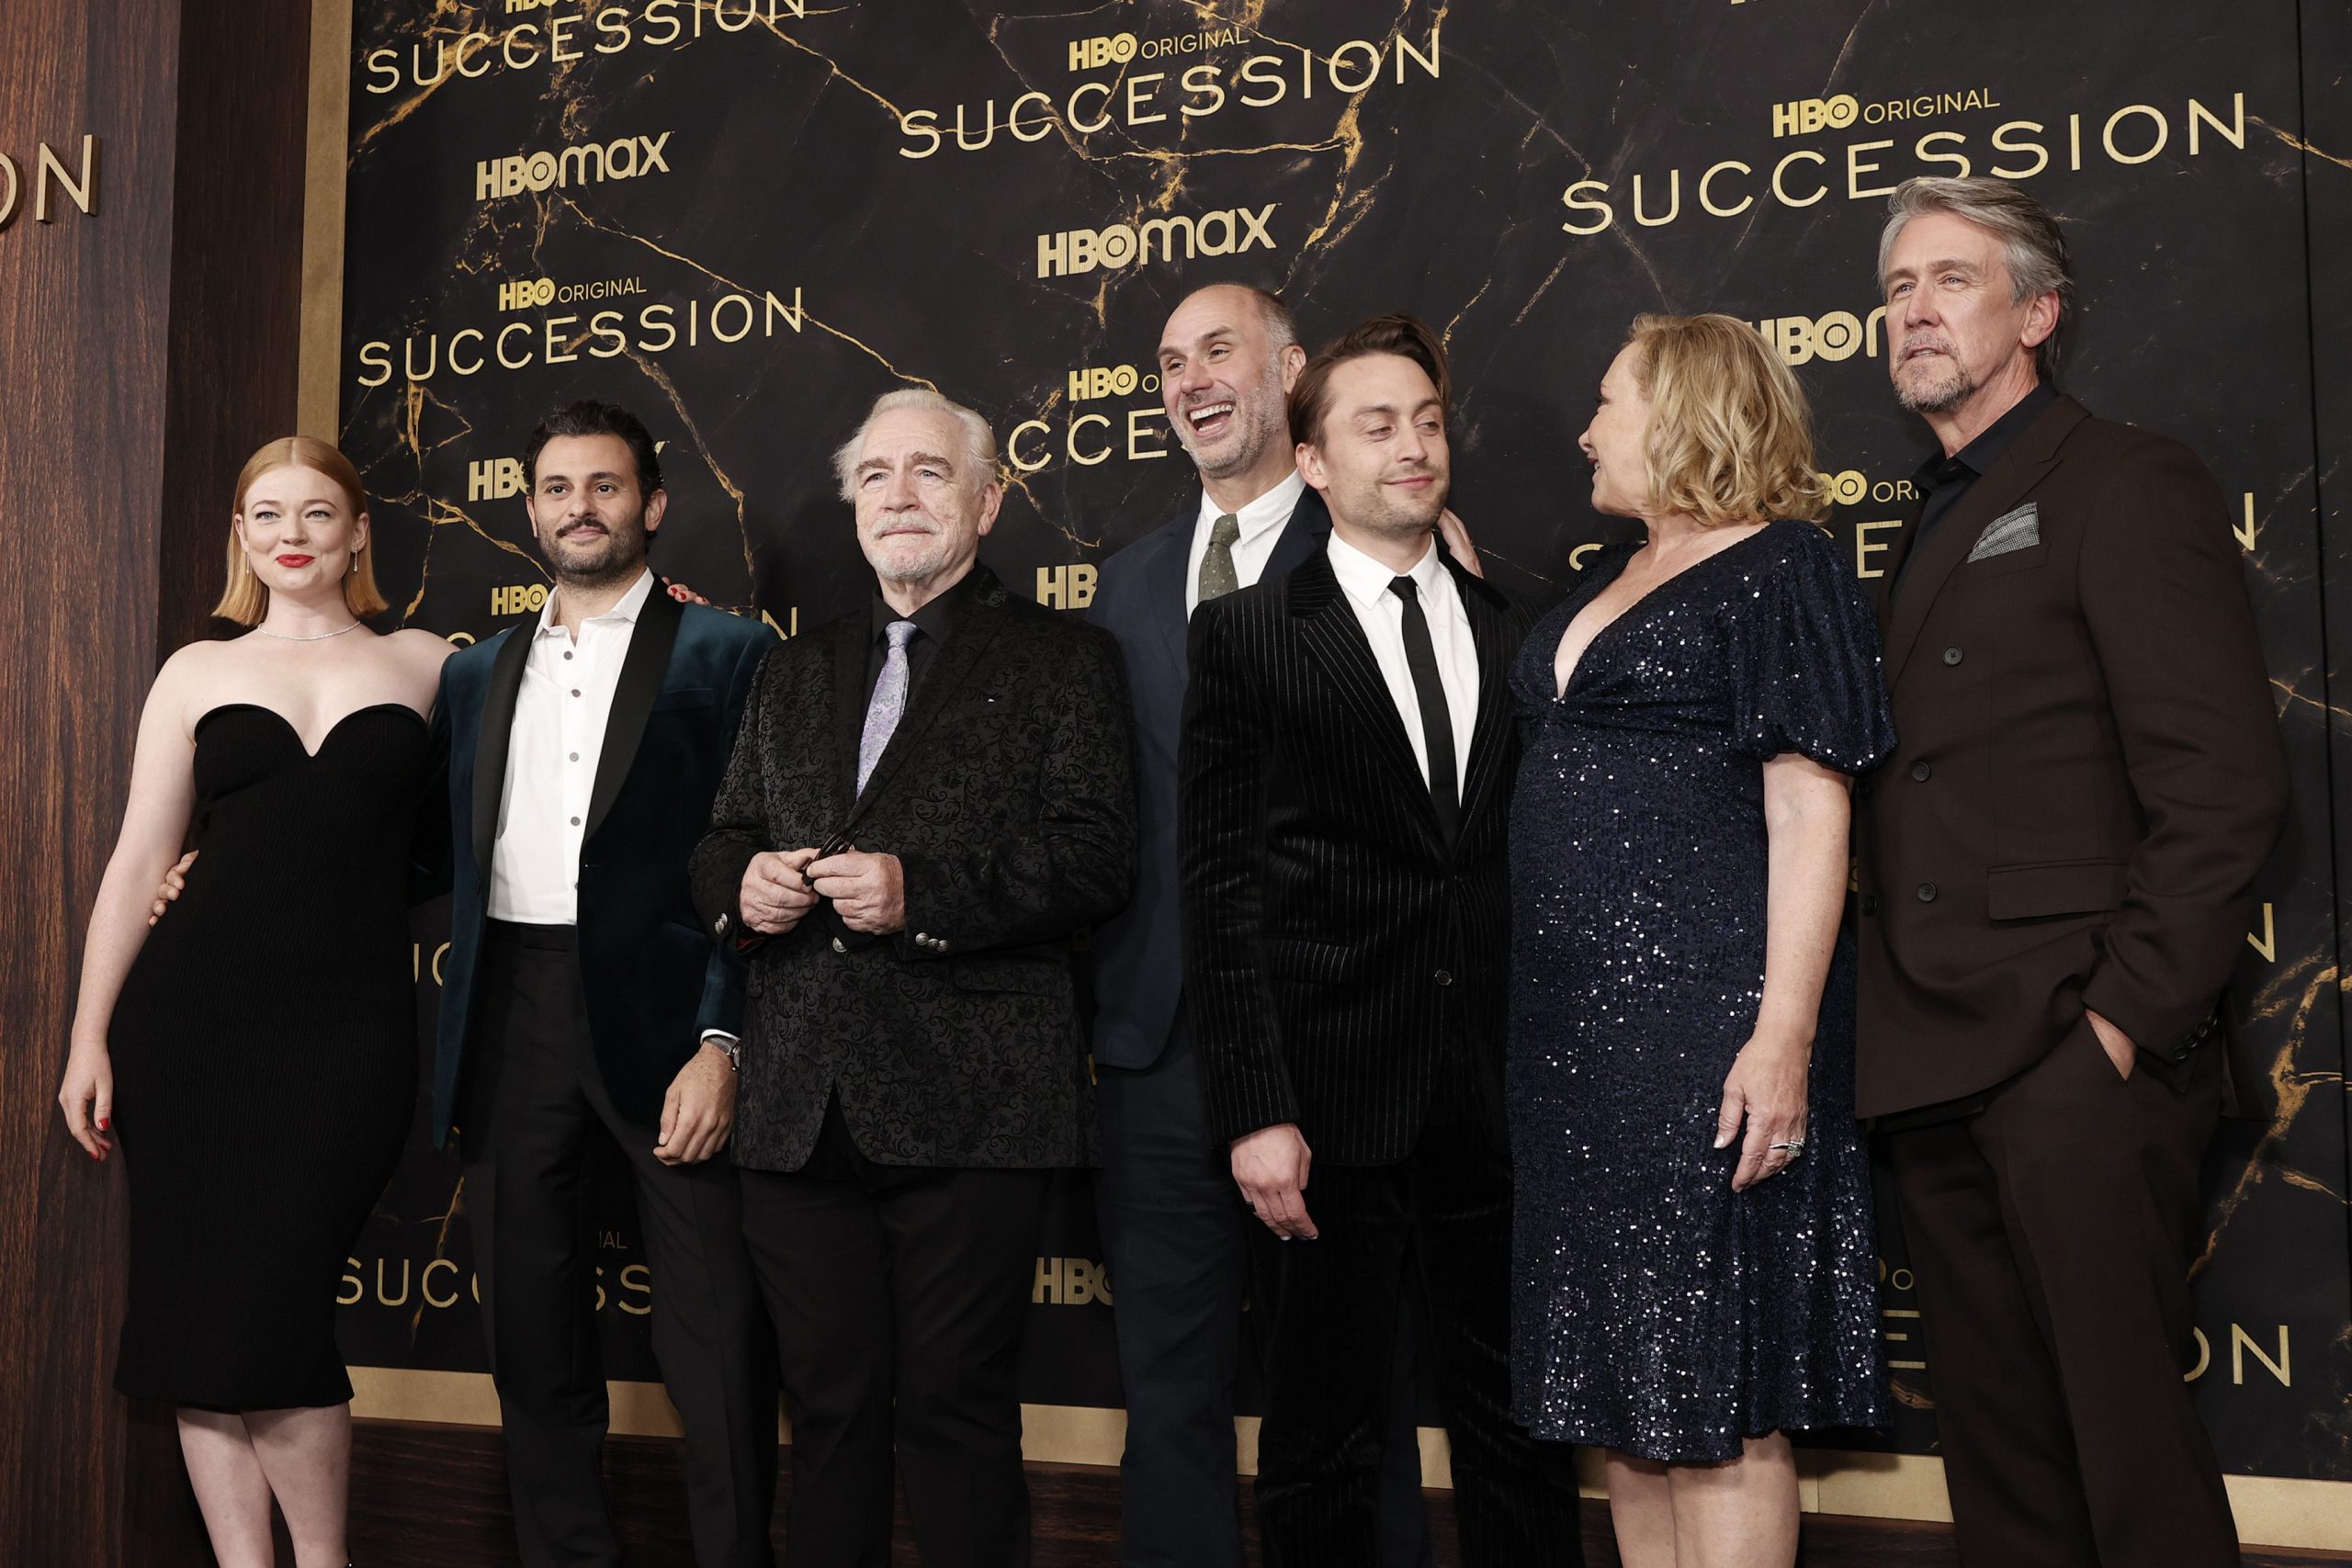 One of the few TV series that draws the entire world together is Succession. The hit HBO drama follows billionaire Roy and his dysfunctional progeny as they attempt to stab each other in the back in order to become the new CEO of their family's global media empire. With son Kendall's effort to usurp his father being broadcast on television, Season 3 went into "full beast mode." Kendall's death was also sadly televised. By the time the season three finale aired in December 2021, the writers had blown the programme wide open, with a dramatic finish that left fans clamouring for answers right away. We'll have to wait and be patient, unfortunately.